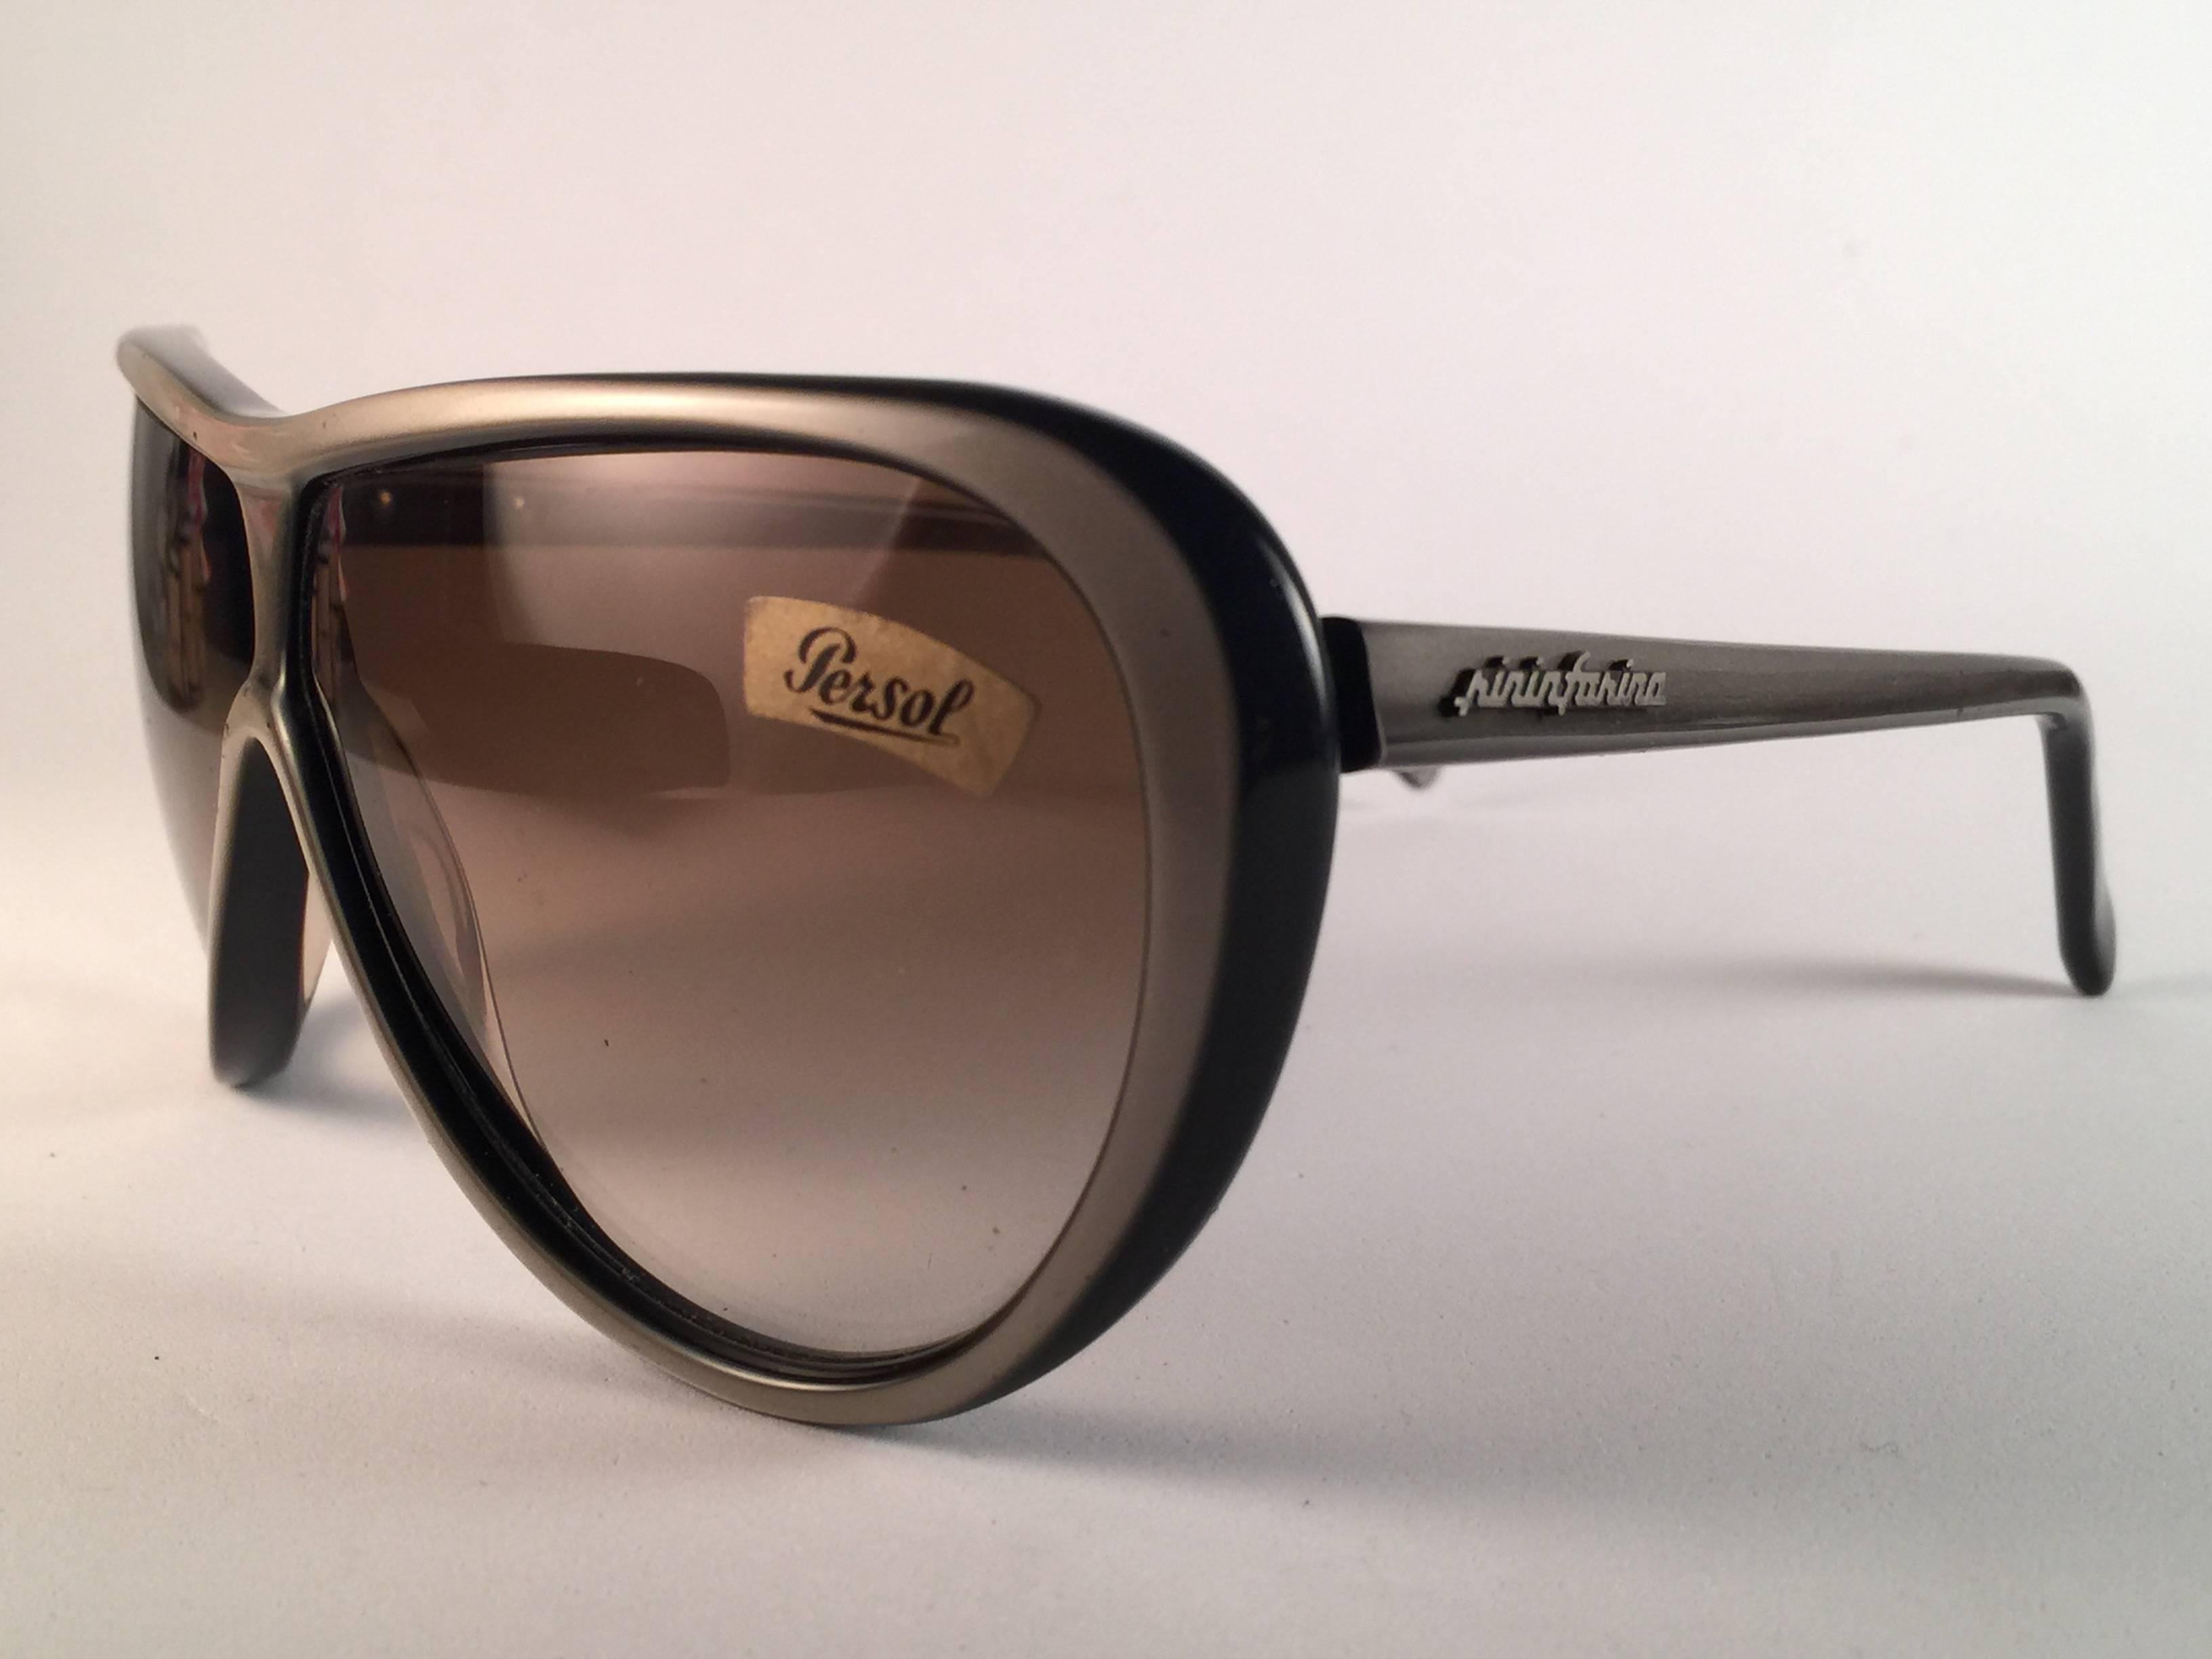 New Vintage Persol Ratti Pininfarina Sunglasses. 

Spotless pair framing light grey lenses.  New, never worn or displayed. This pair may show minor sign of wear due to storage.  

Made in Italy